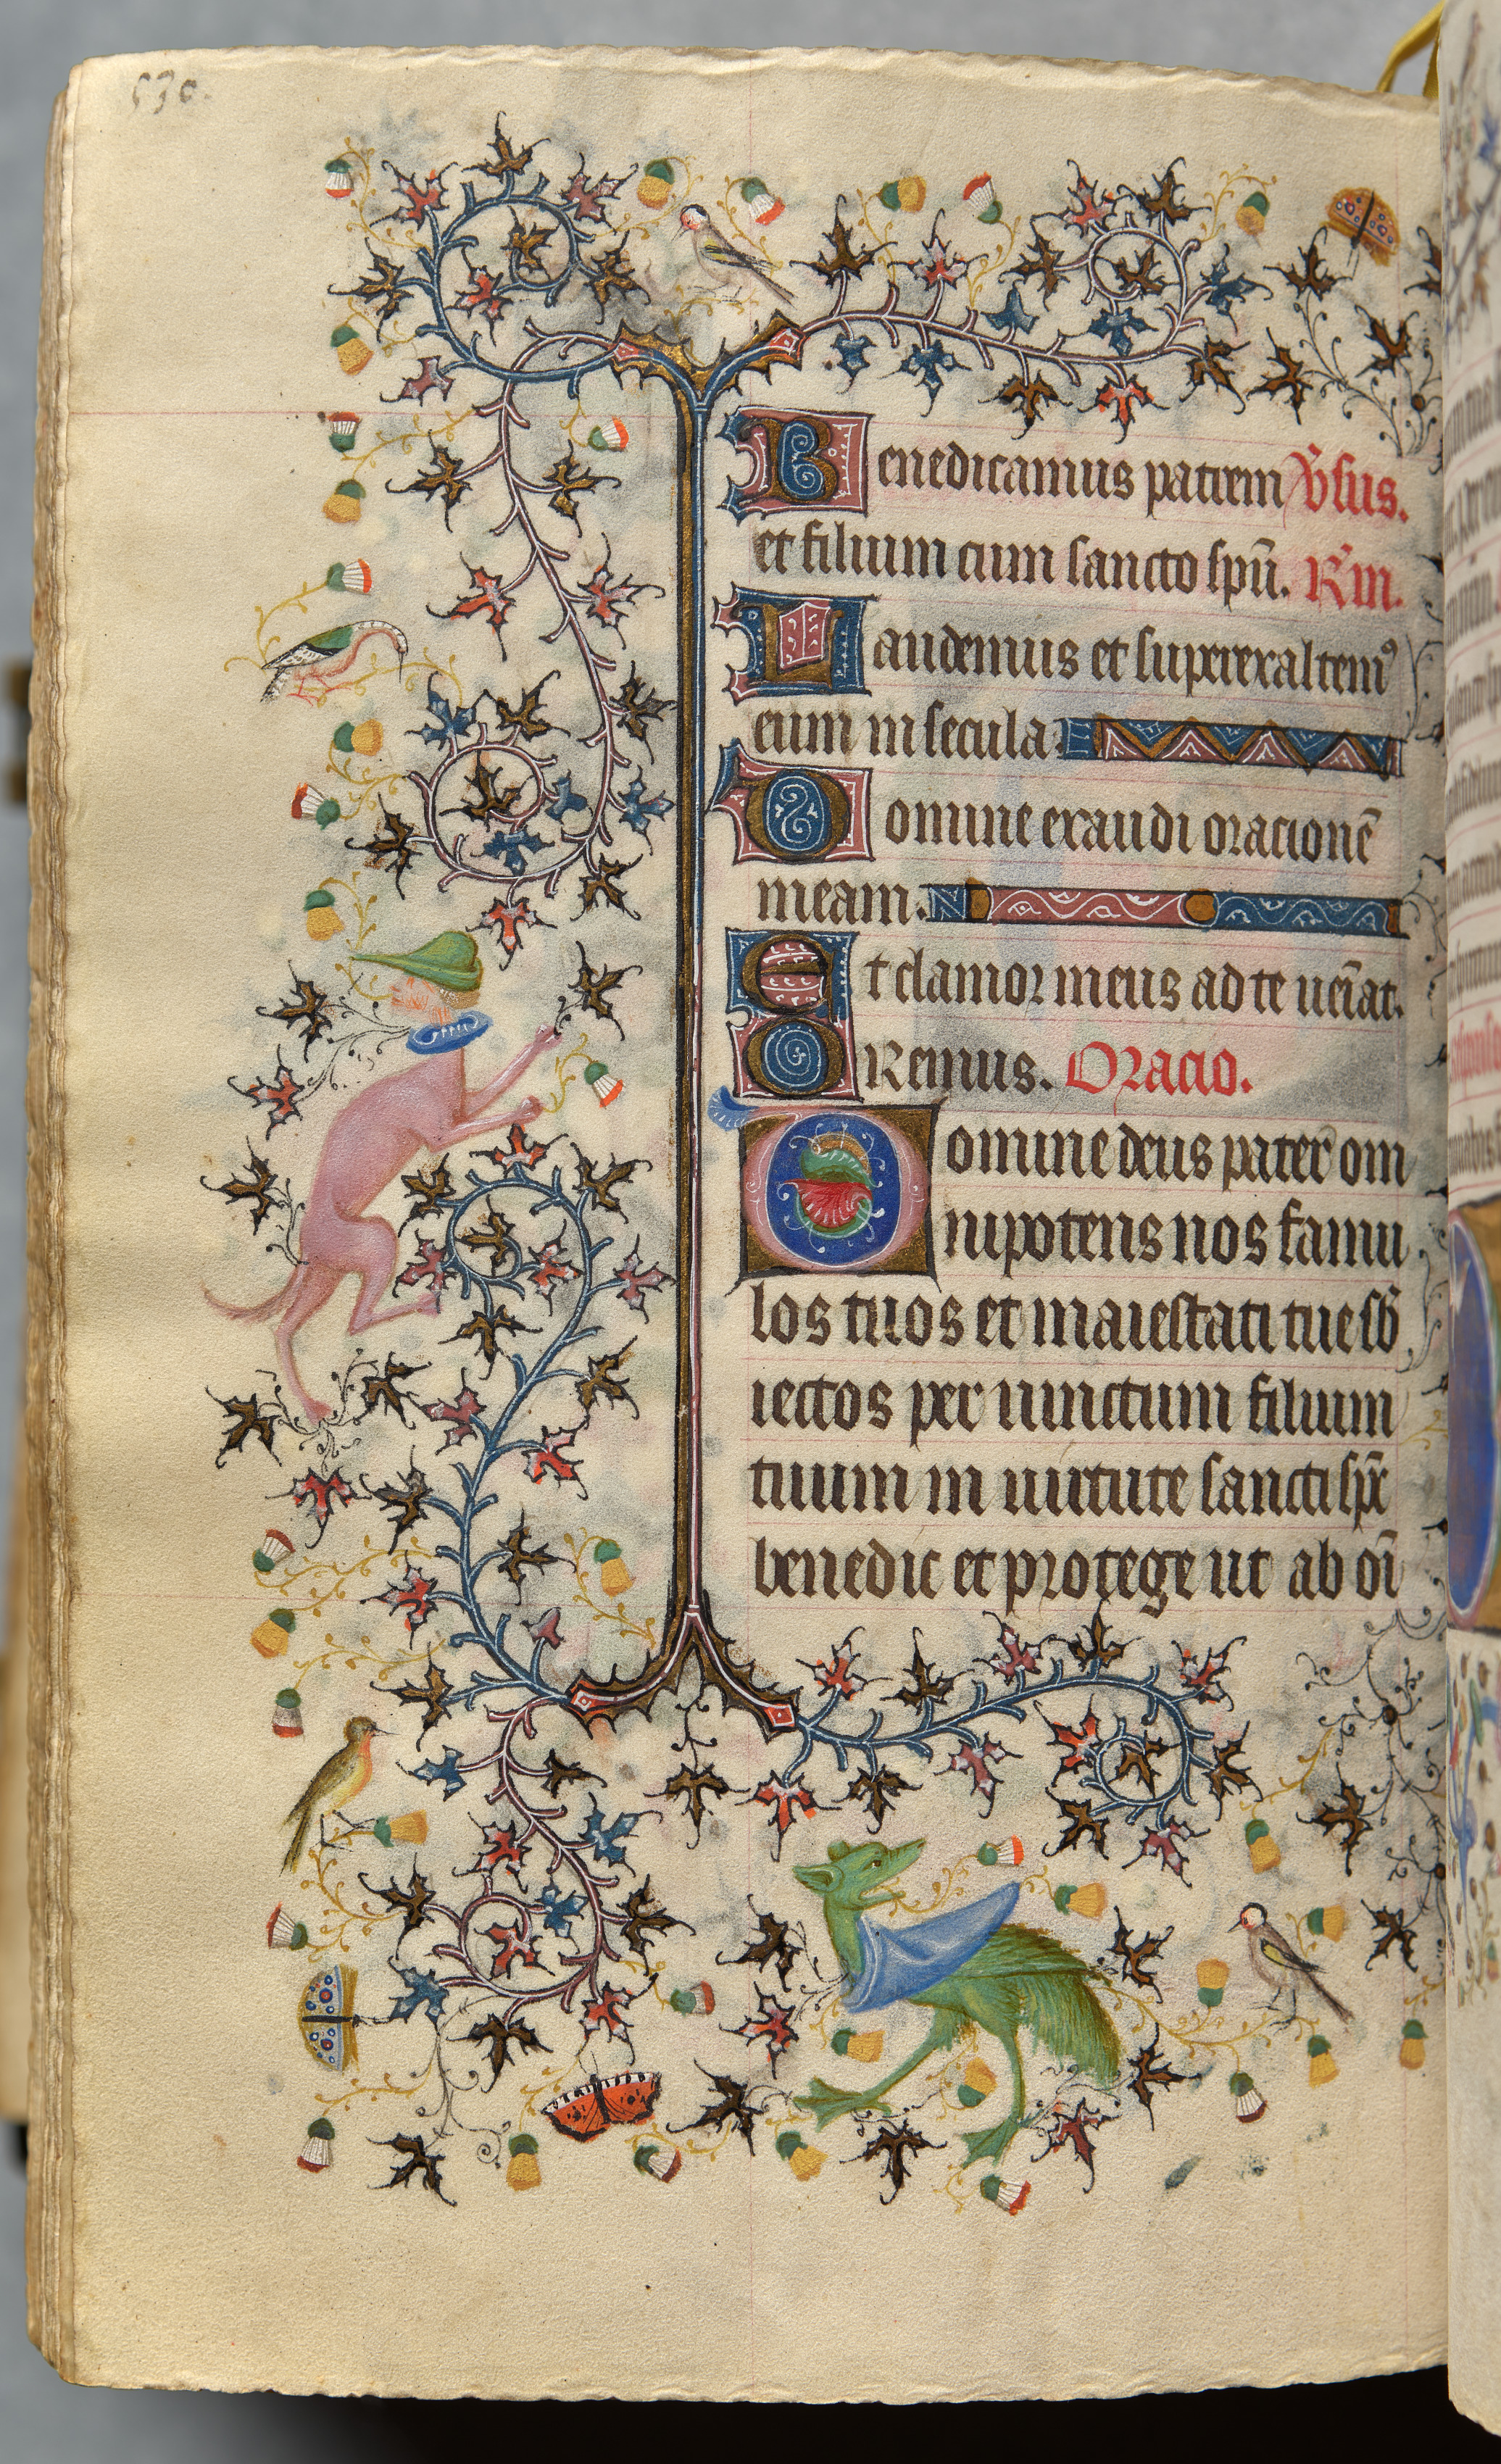 Hours of Charles the Noble, King of Navarre (1361-1425): fol. 259v, Text